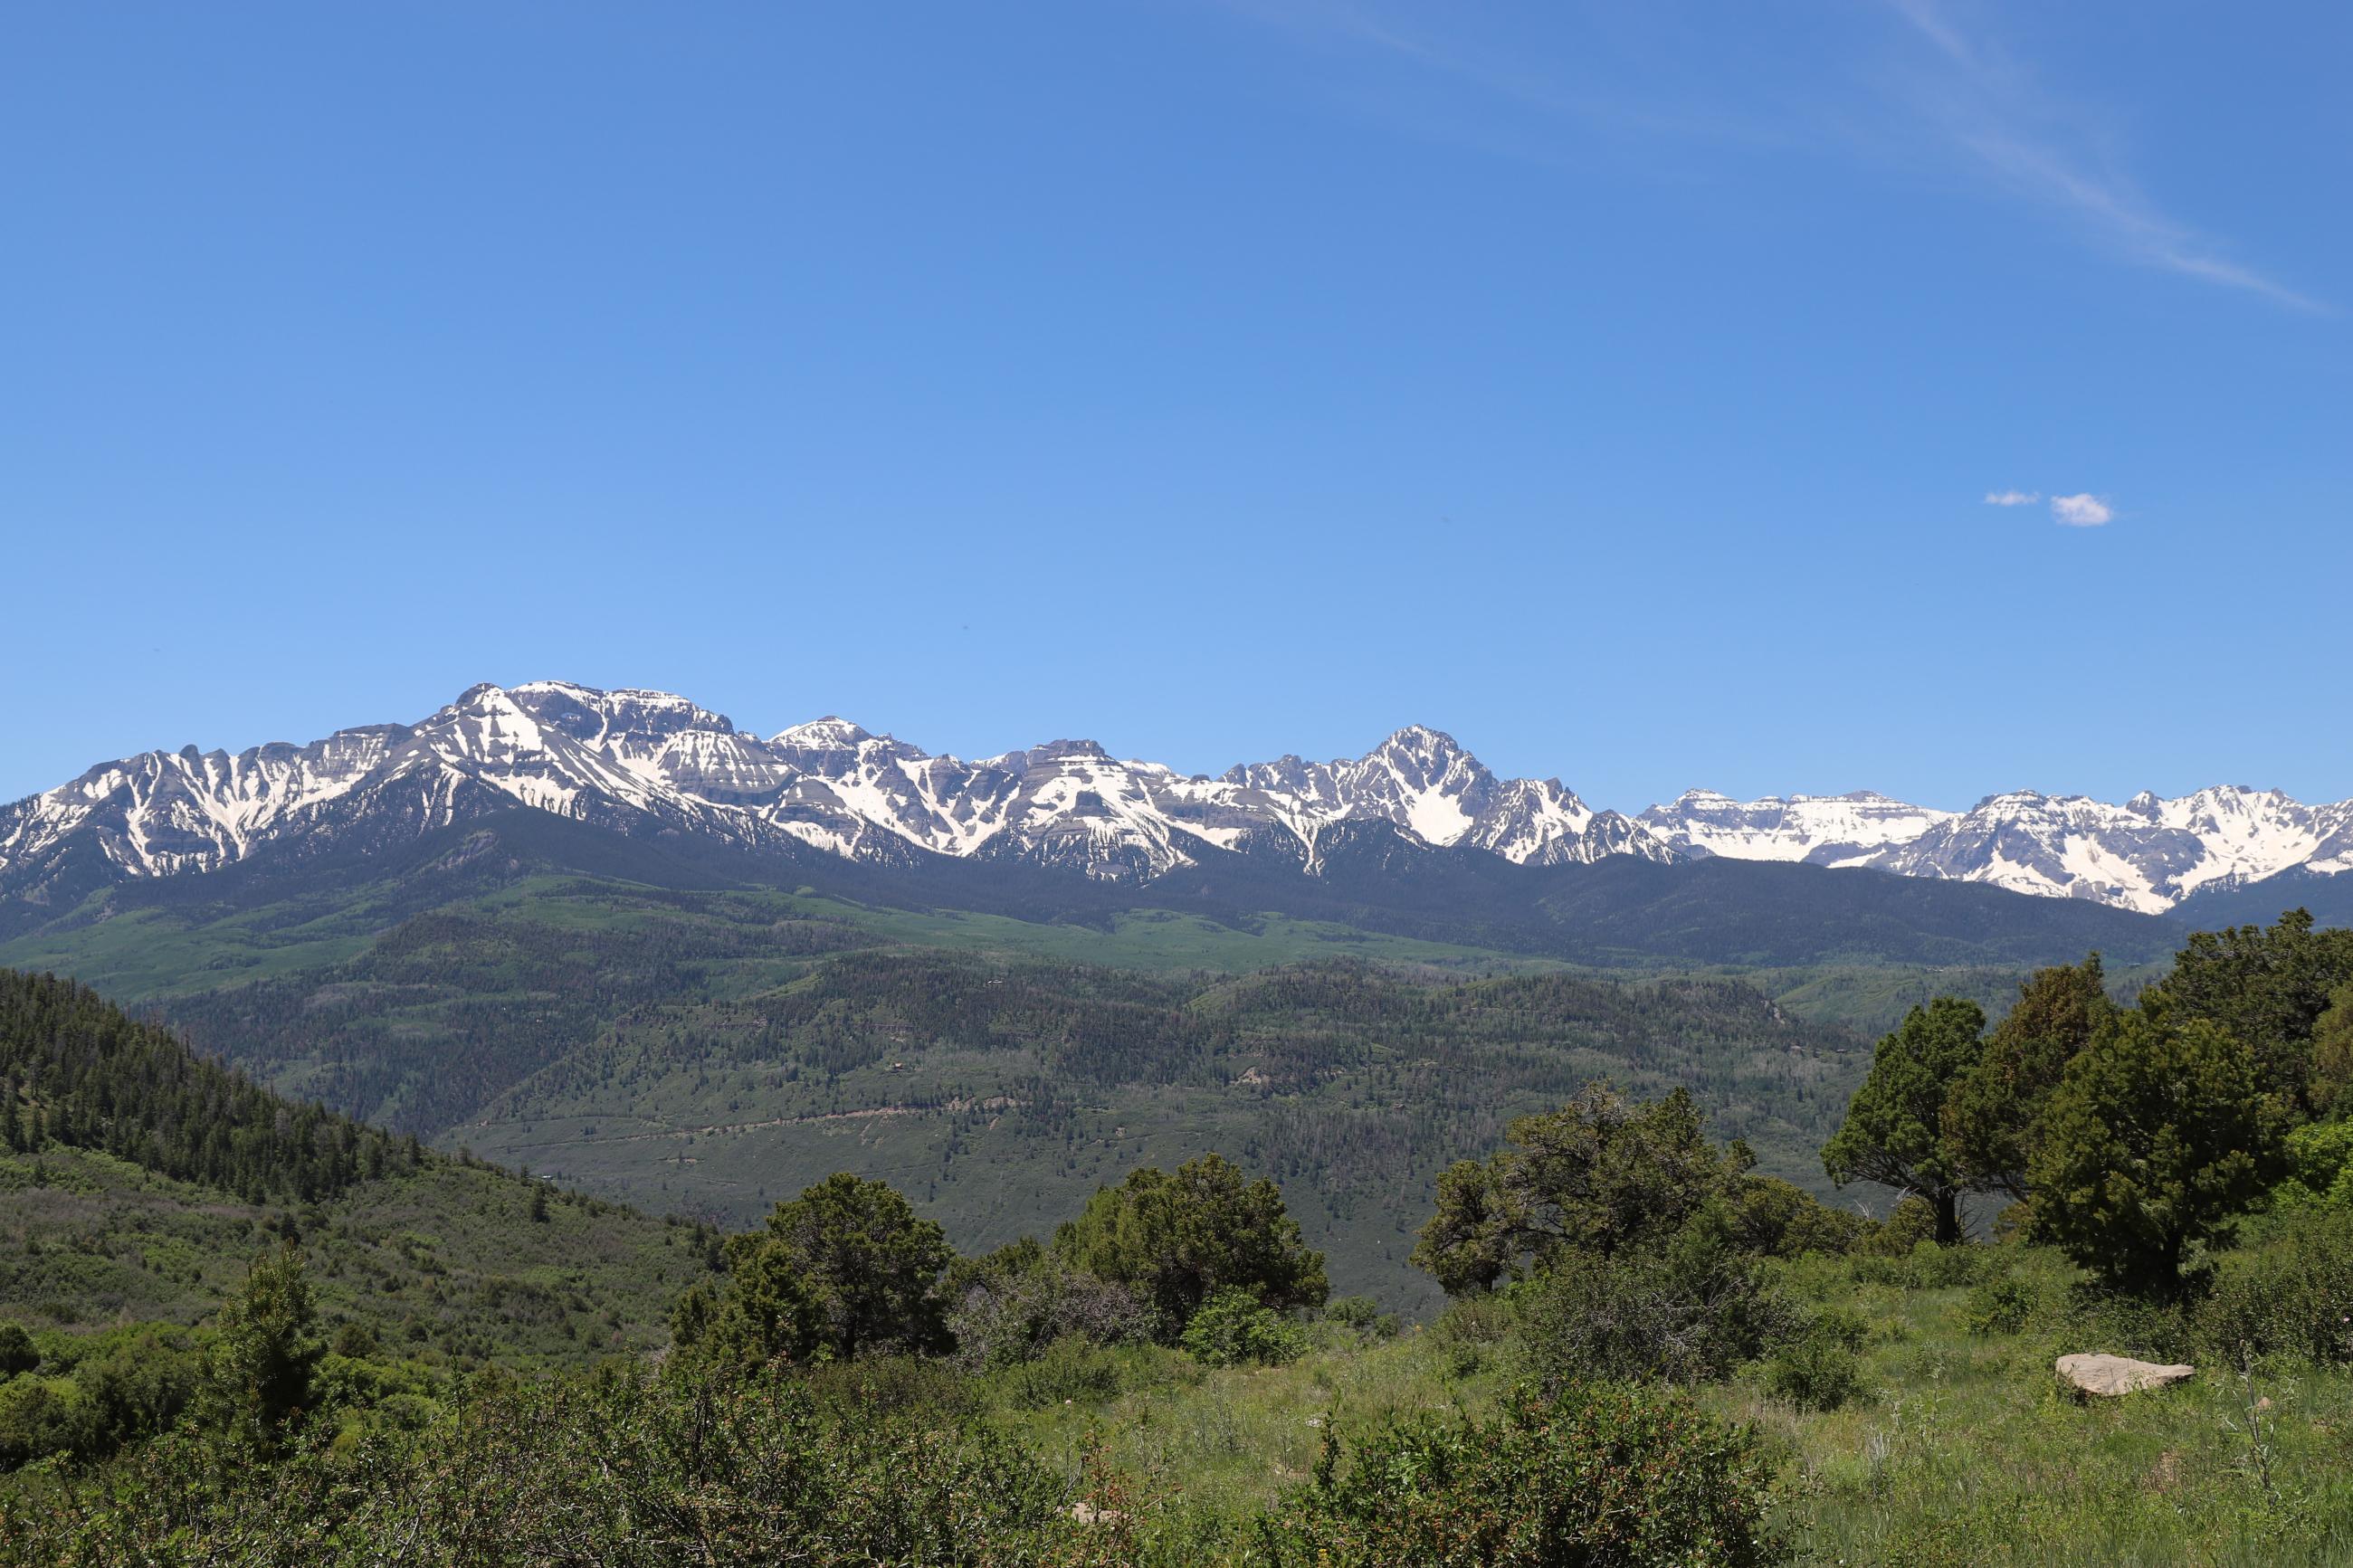 The image shows a landscape picture including ragged, snow-covered mountains in the background, green rolling hills in the foreground, and Baldy Mountain in the midground with a bluebird sky overhead